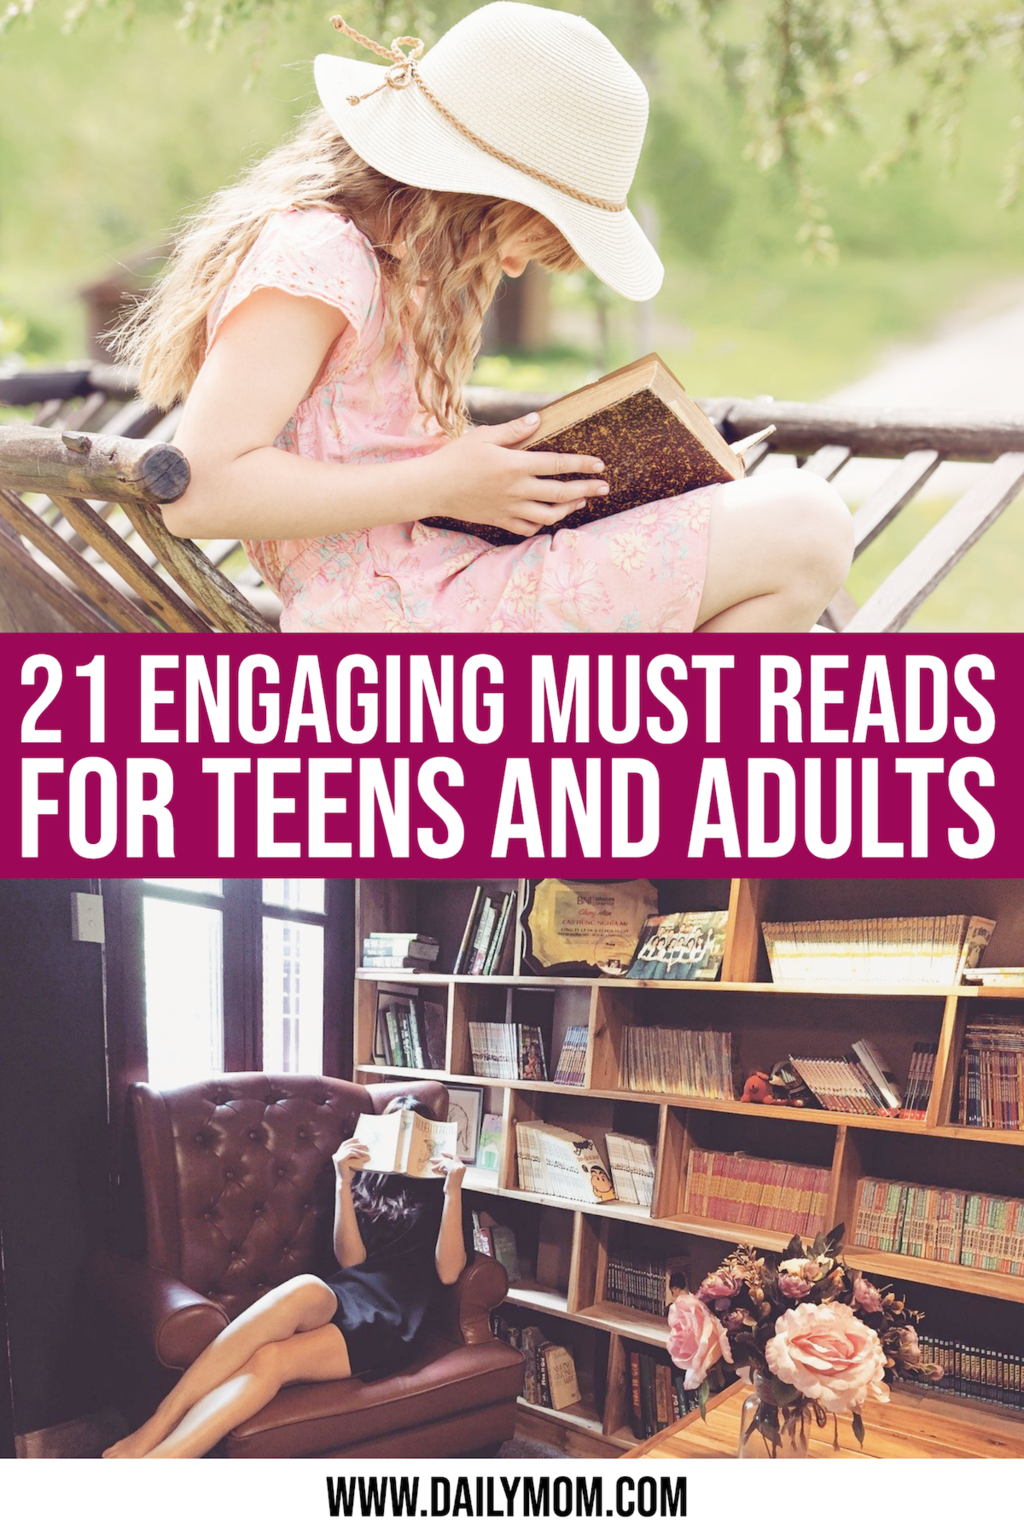 21 Tantalizing & Engaging Must Reads For Teens And Adults